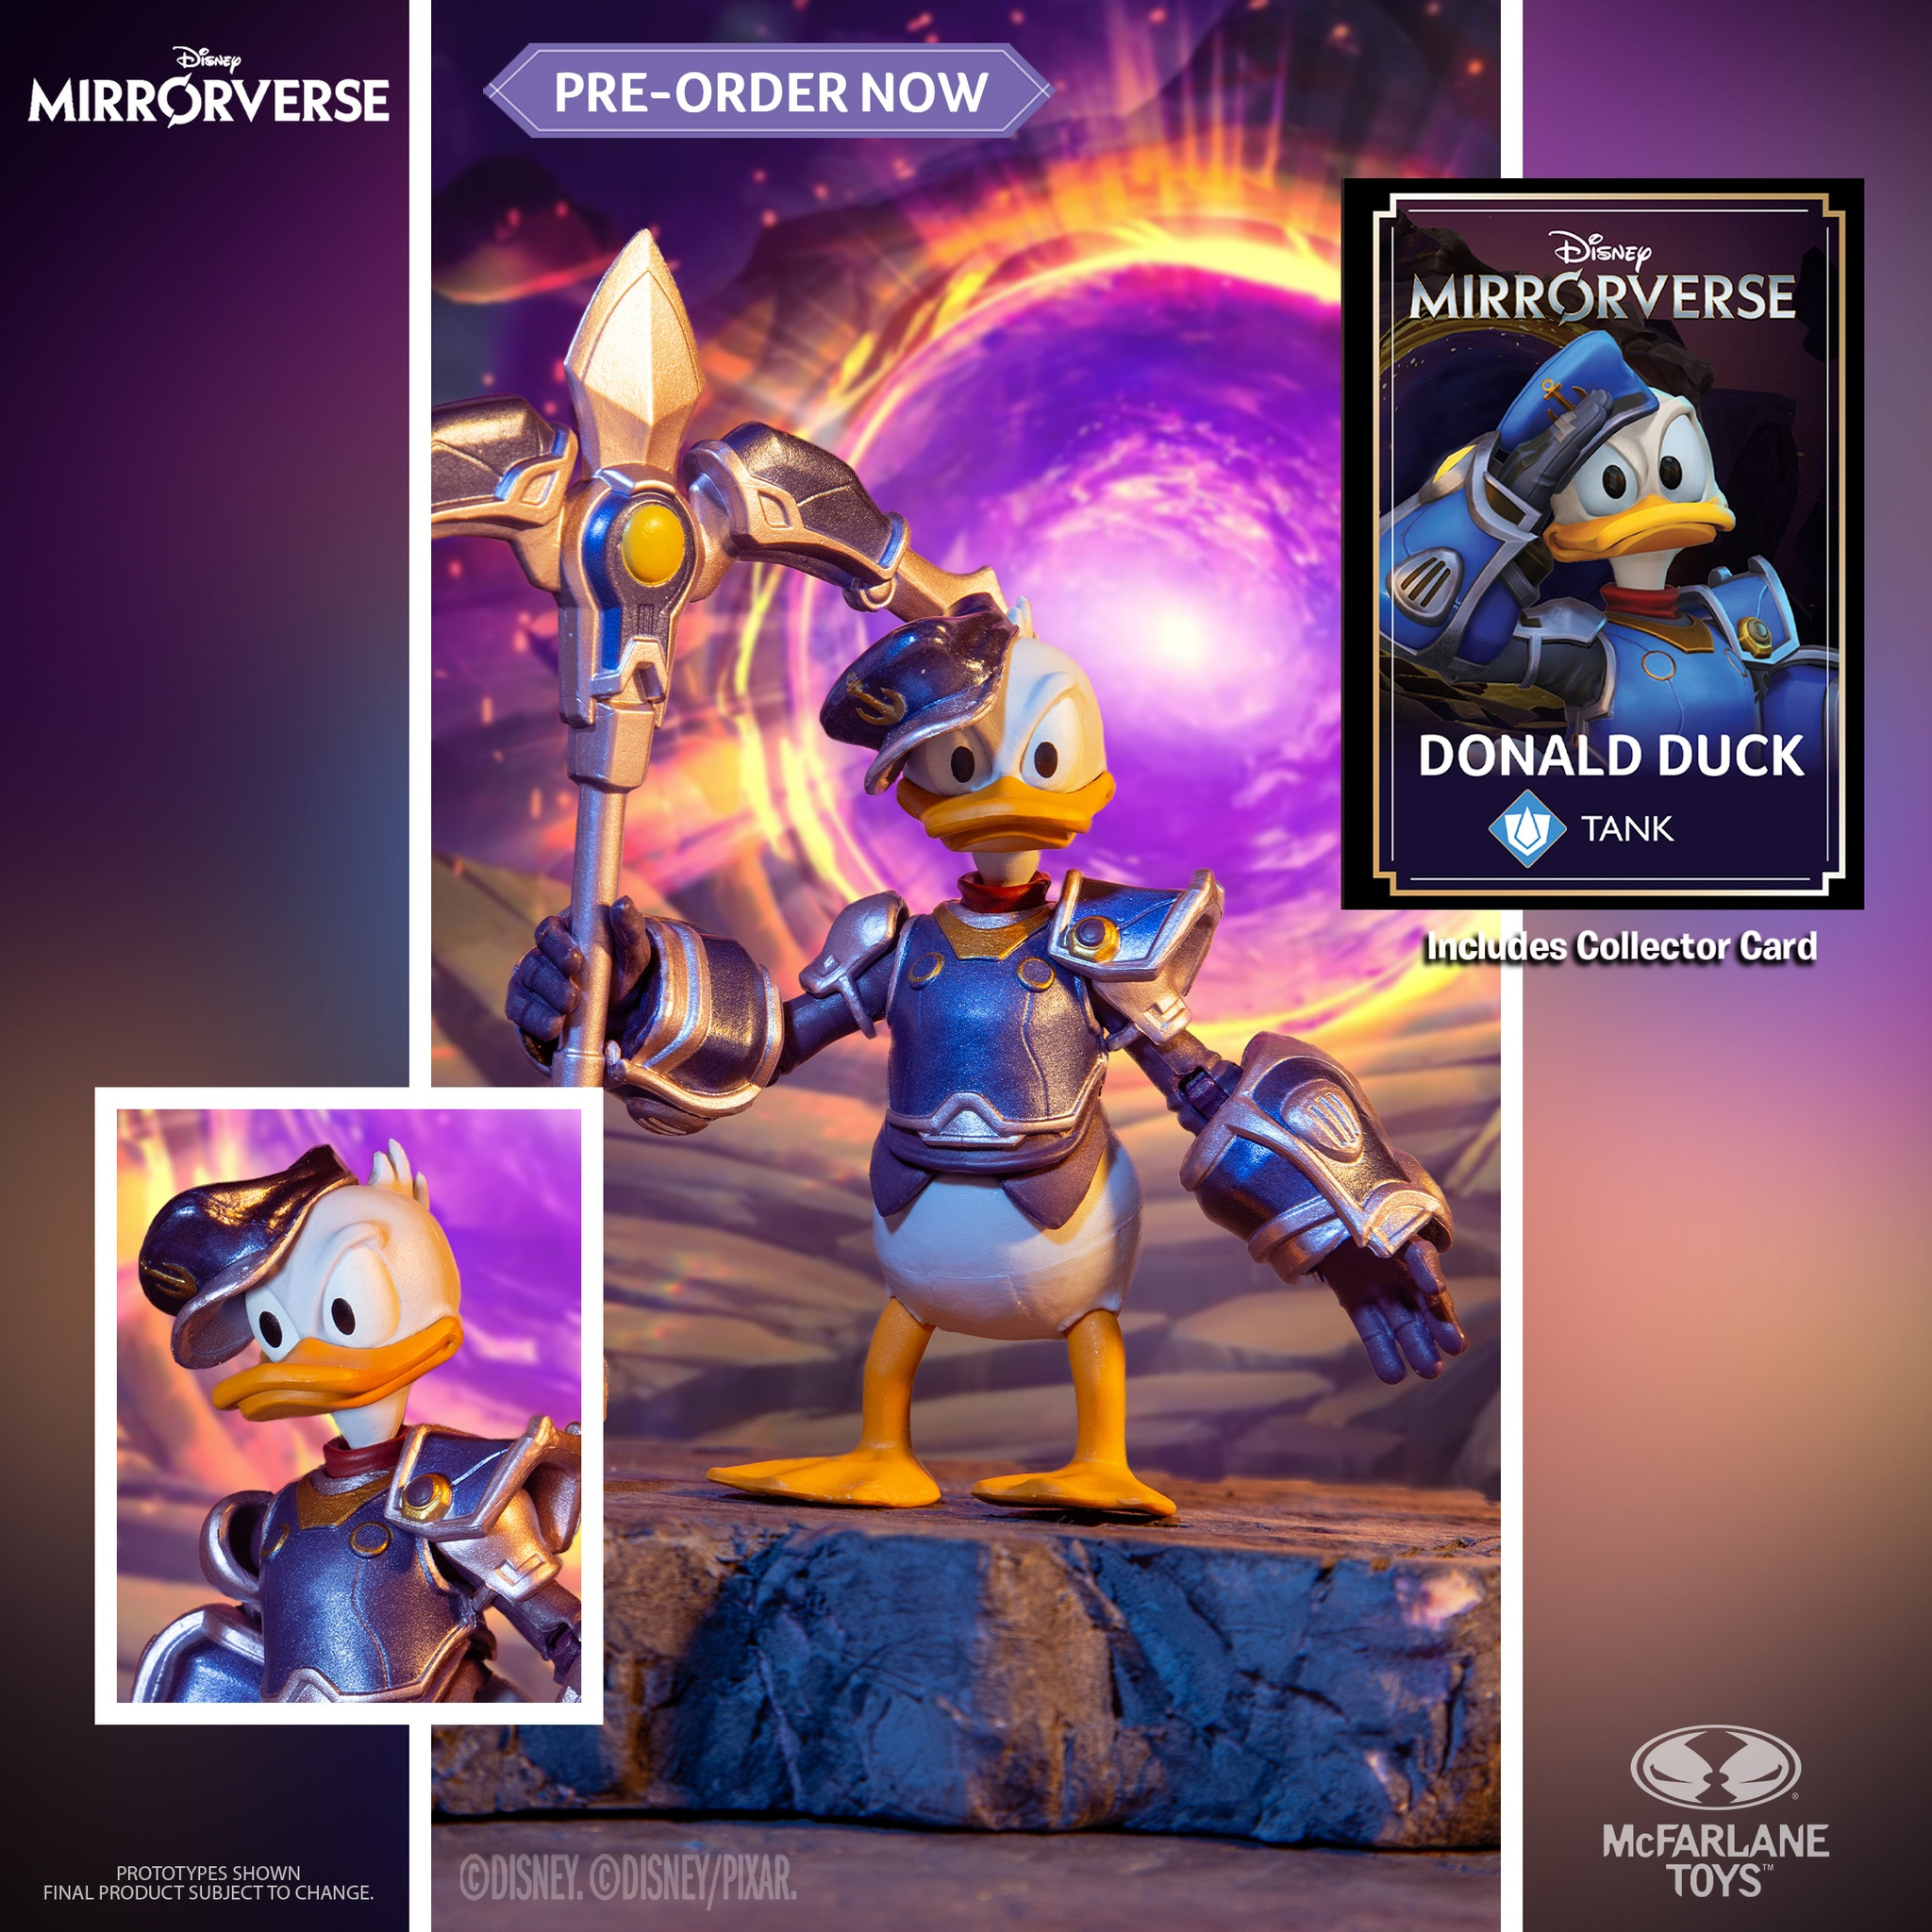 Disney Mirrorverse Donald - I helped with articulation engineering and minor sculpt revisions.